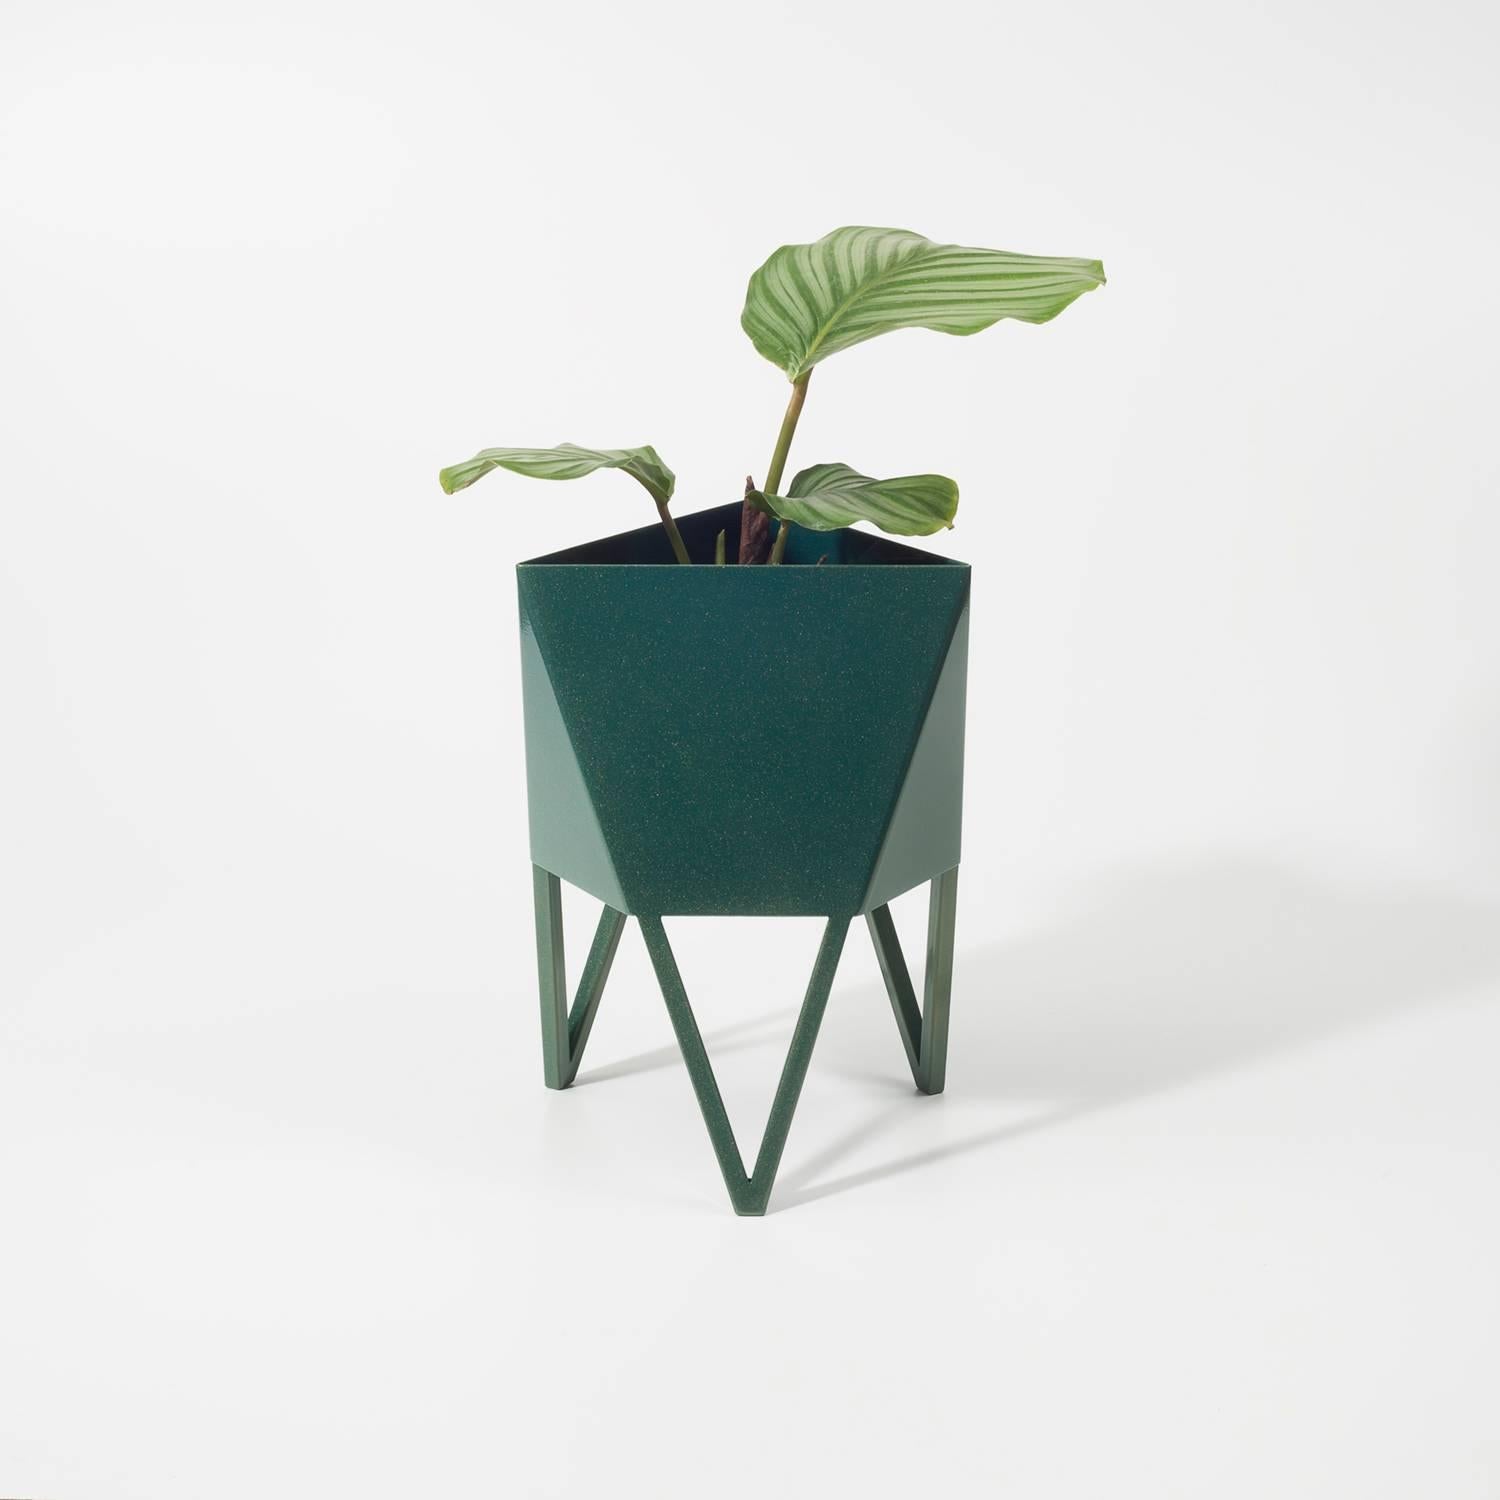 Deca Planter in Living Coral Steel, Mini, by Force/Collide 1